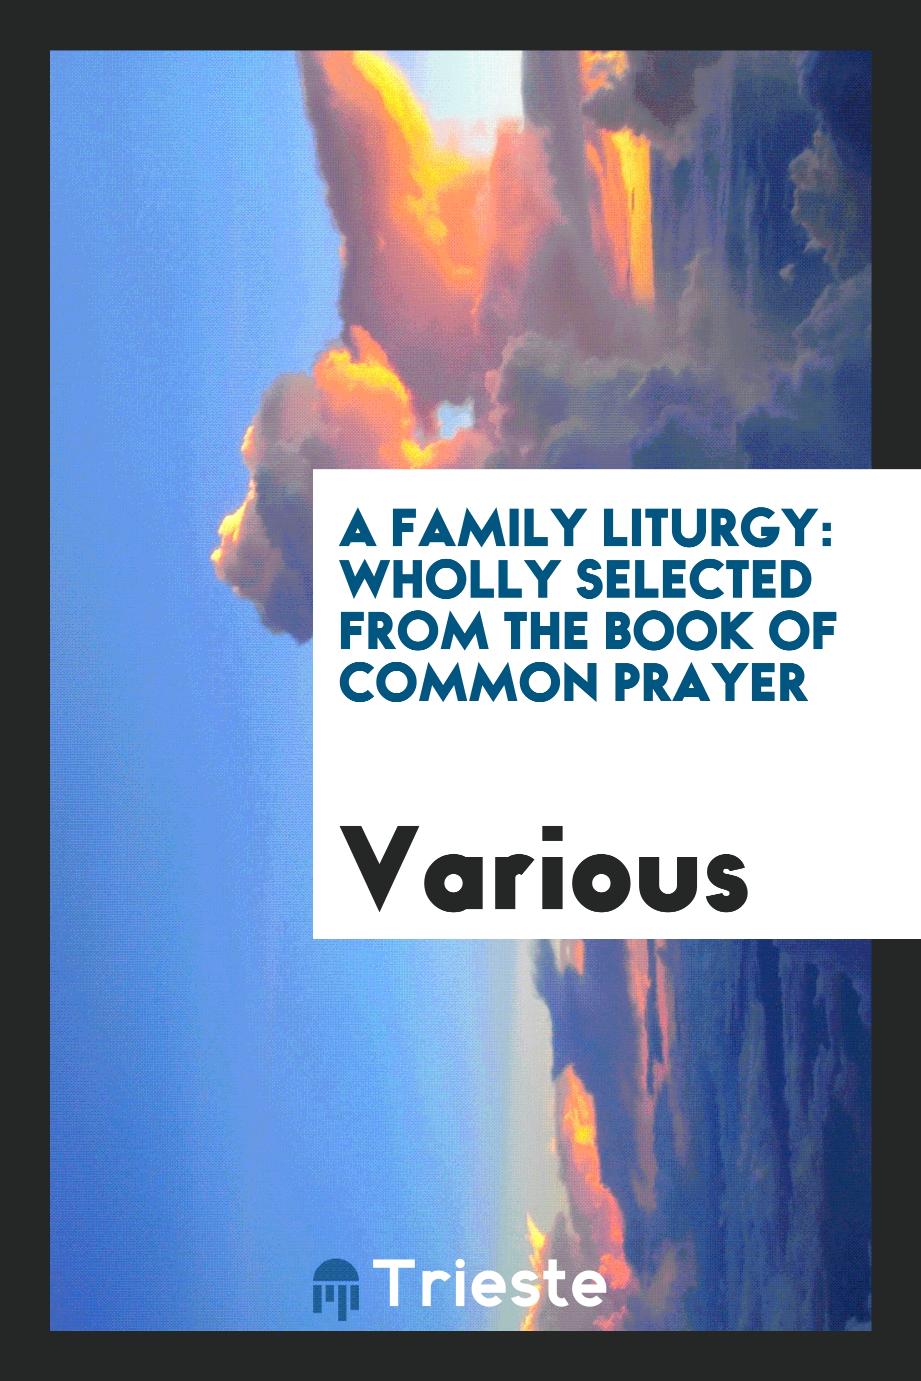 A Family Liturgy: Wholly Selected from the Book of Common Prayer